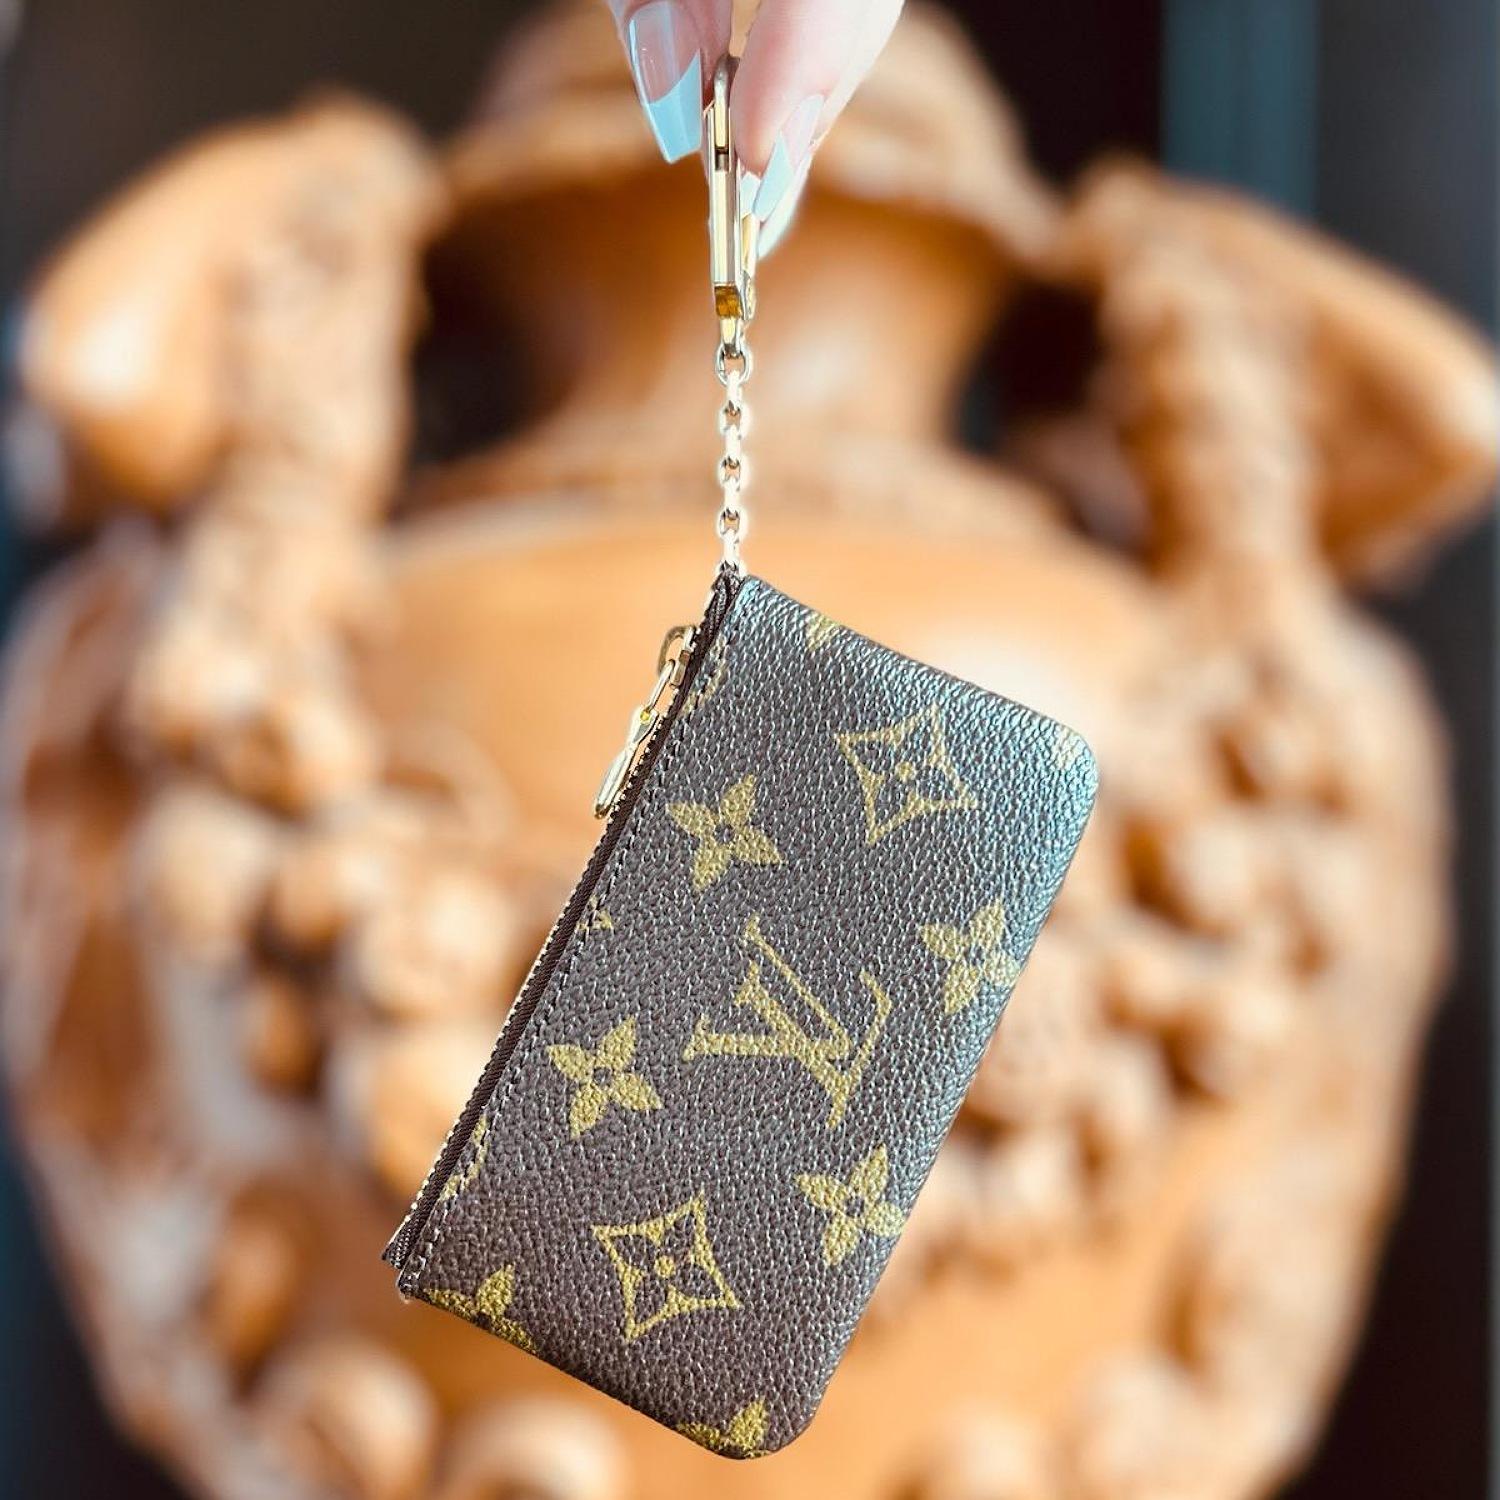 The Key Pouch in the iconic Monogram canvas is a playful yet practical accessory that can carry coins, cards, folded bills and other small items, in addition to keys. Secured with an LV-engraved zip, it can be hooked onto the D-ring inside most